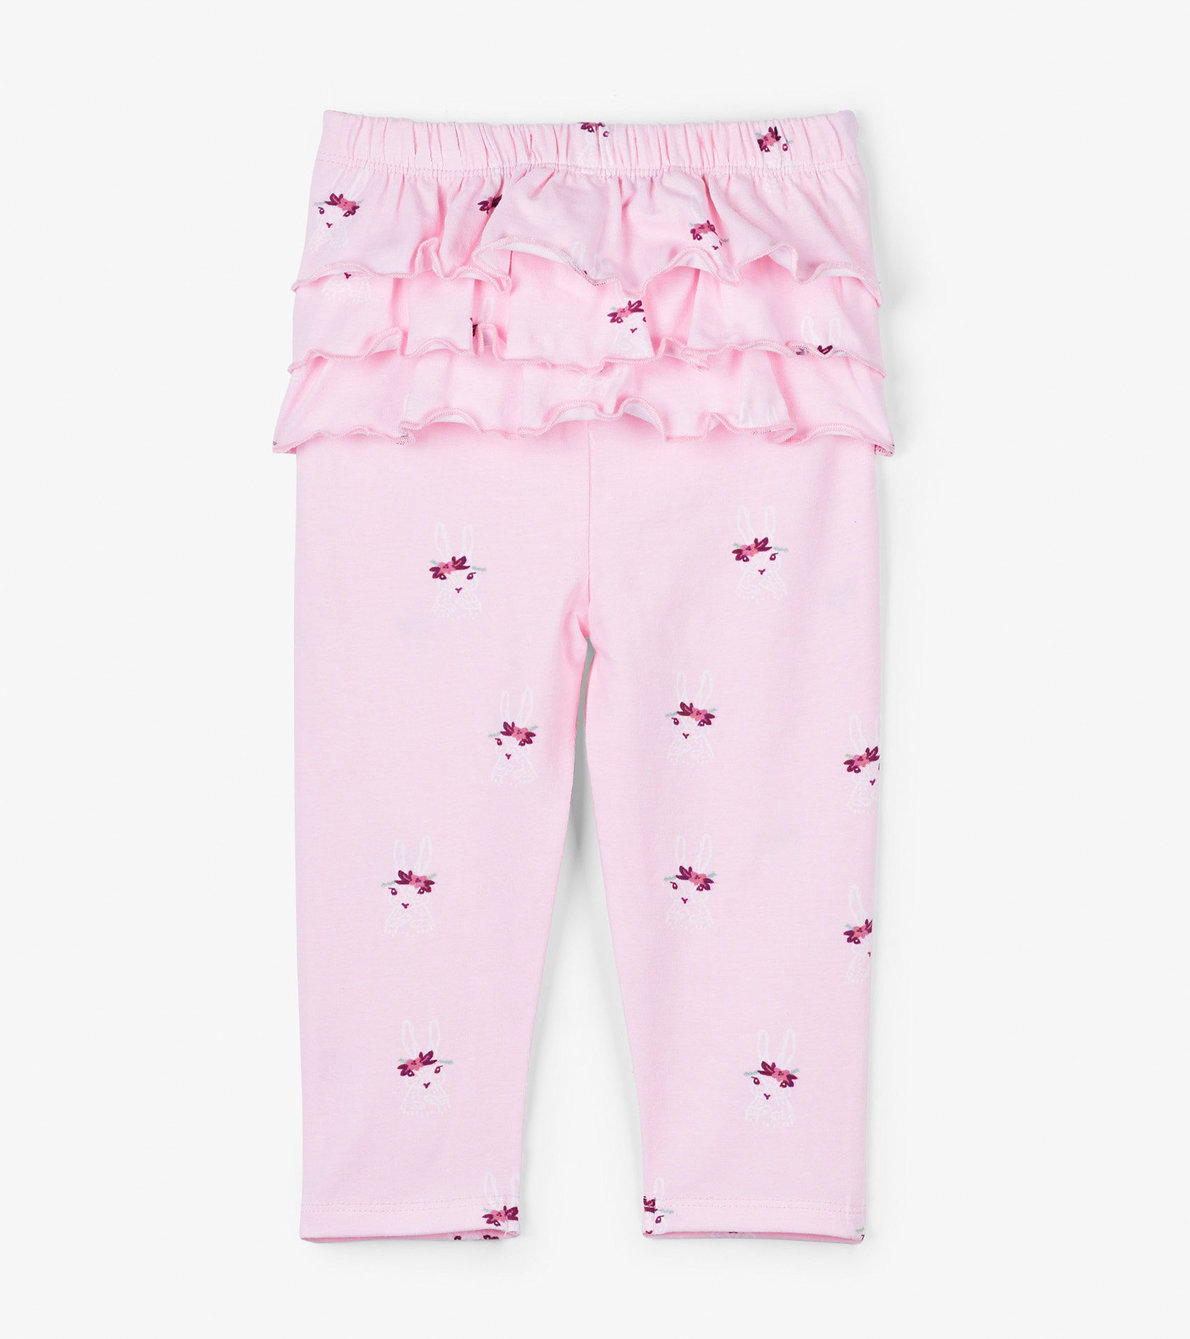 View larger image of Bunny Fluffle Baby Ruffle Leggings